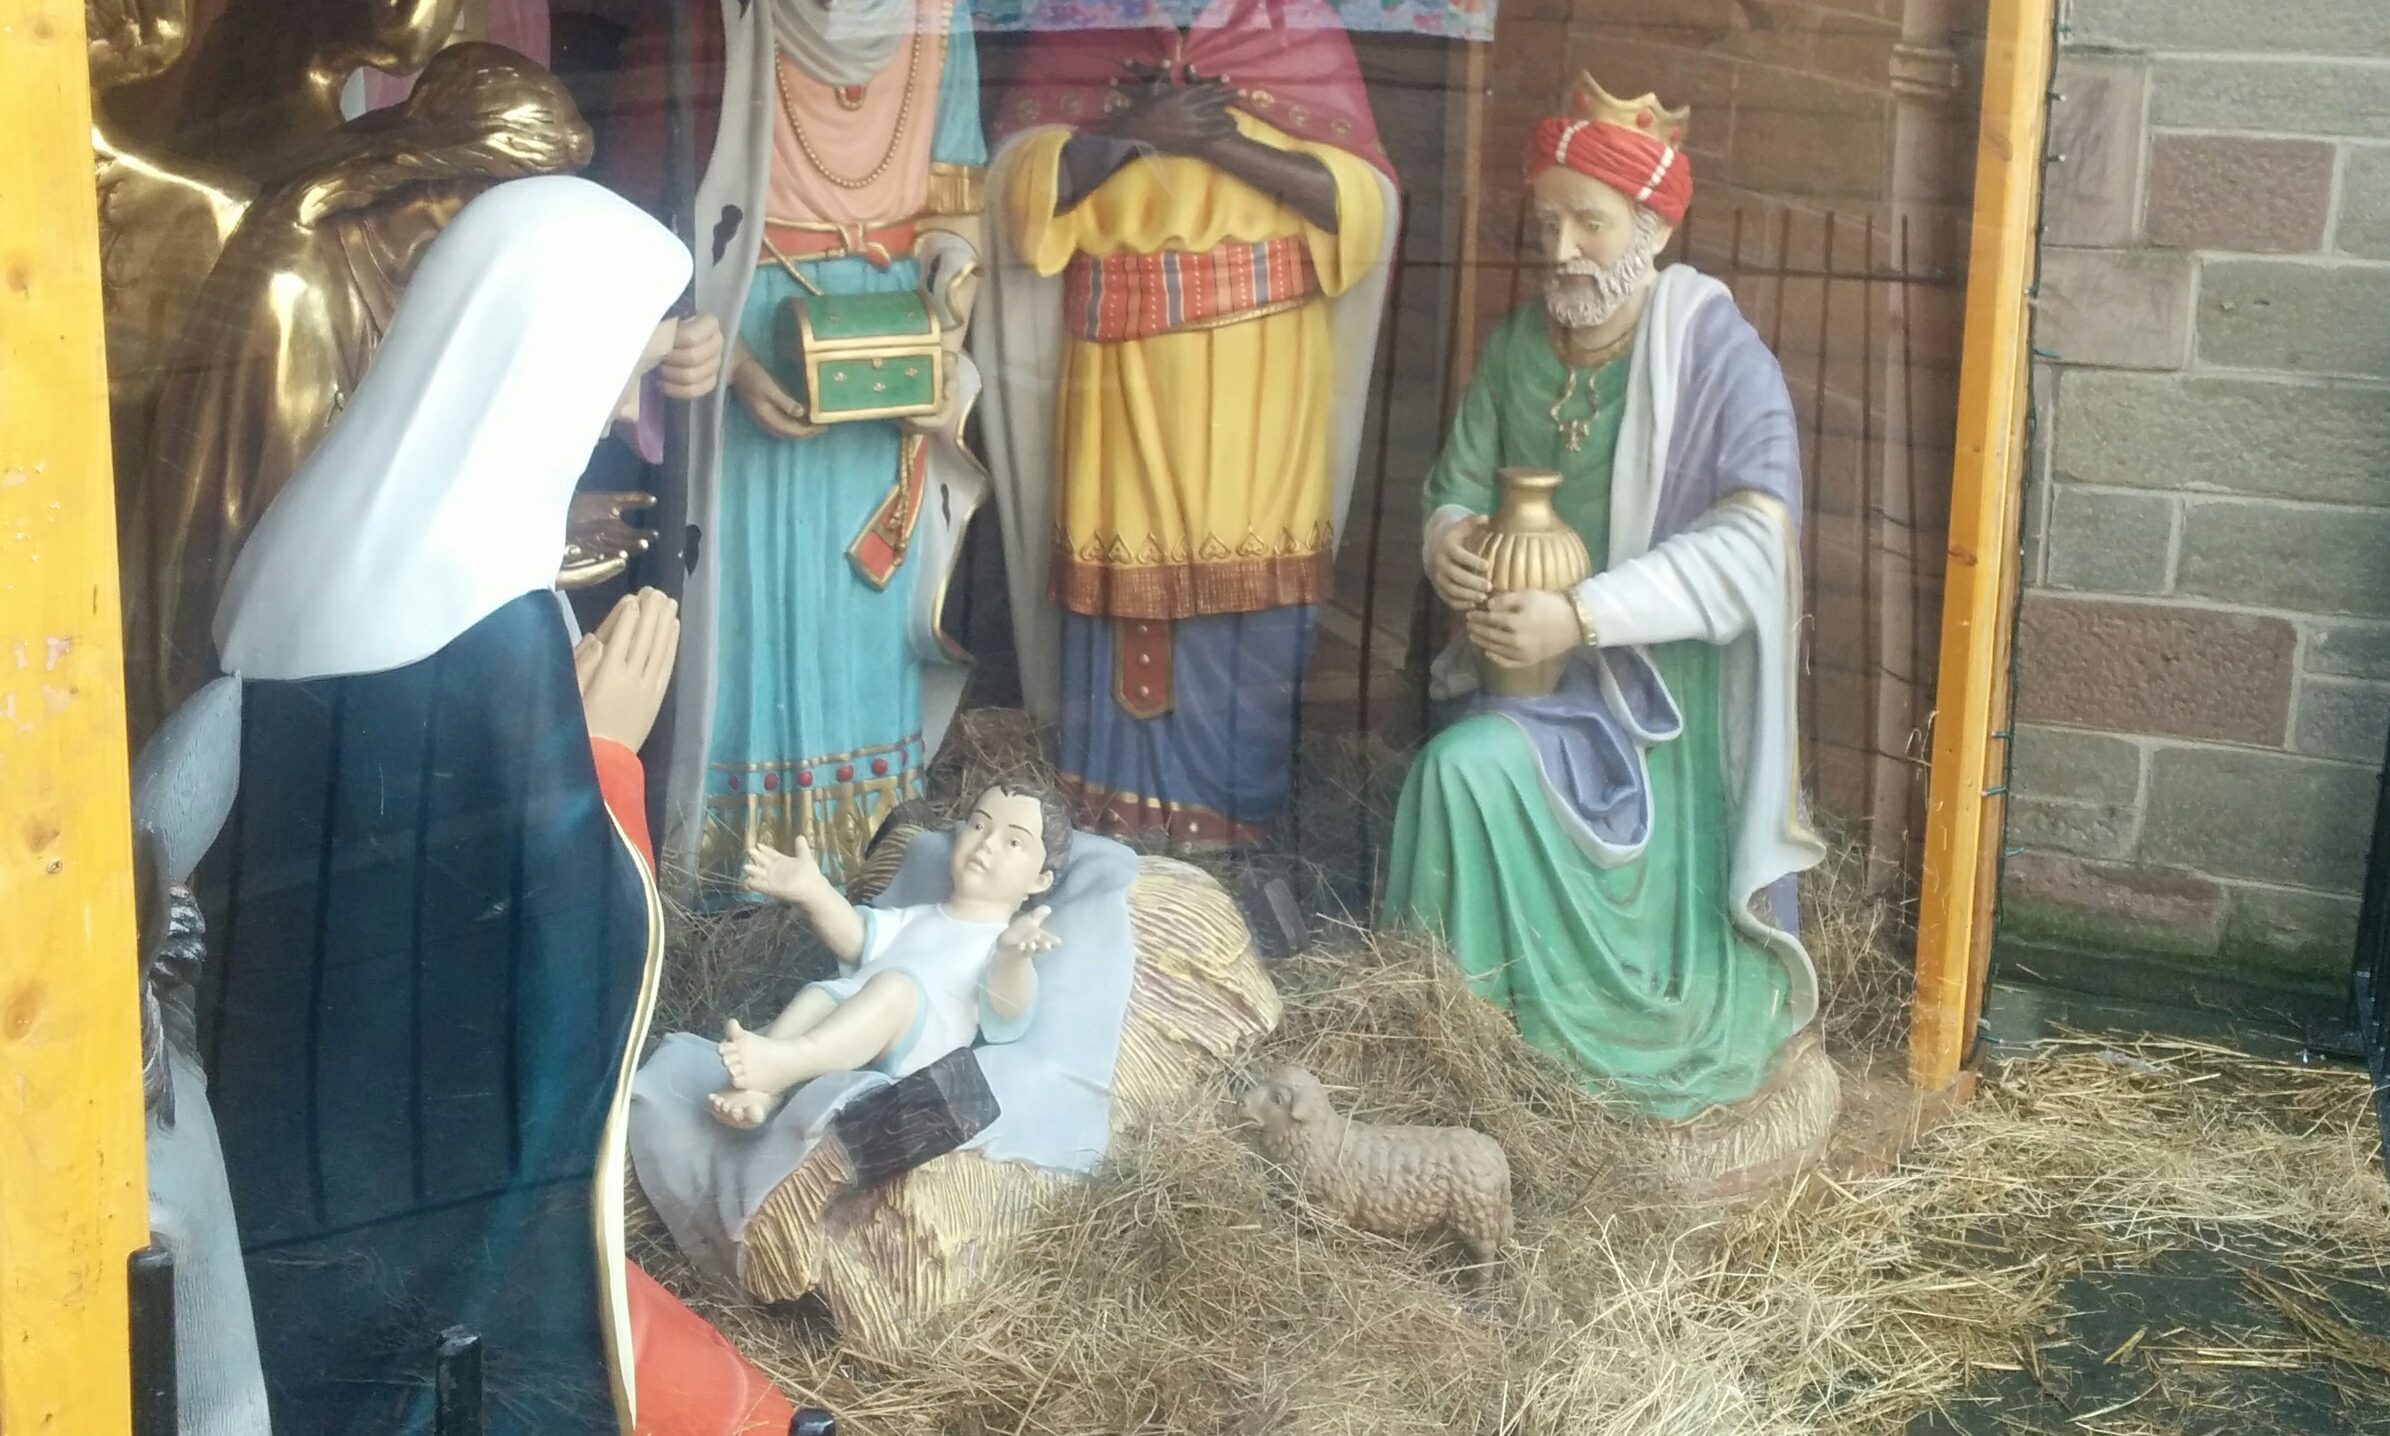 The perspex screen has been put up to protect the nativity display outside St John's Kirk, Perth.